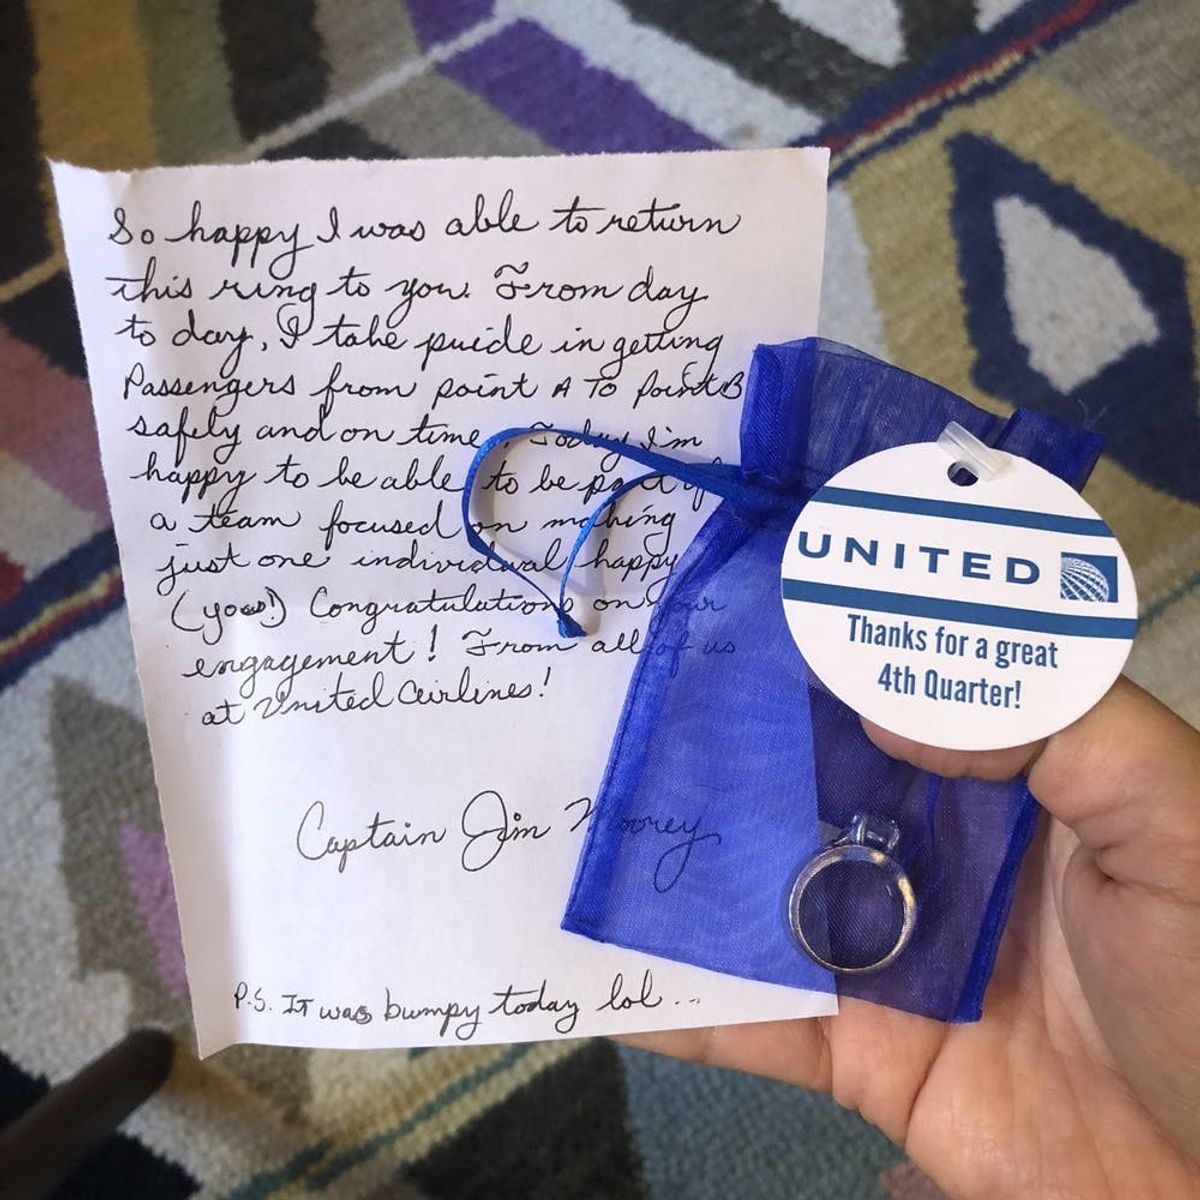 How United “Reunited” Me With My Lost Wedding Ring